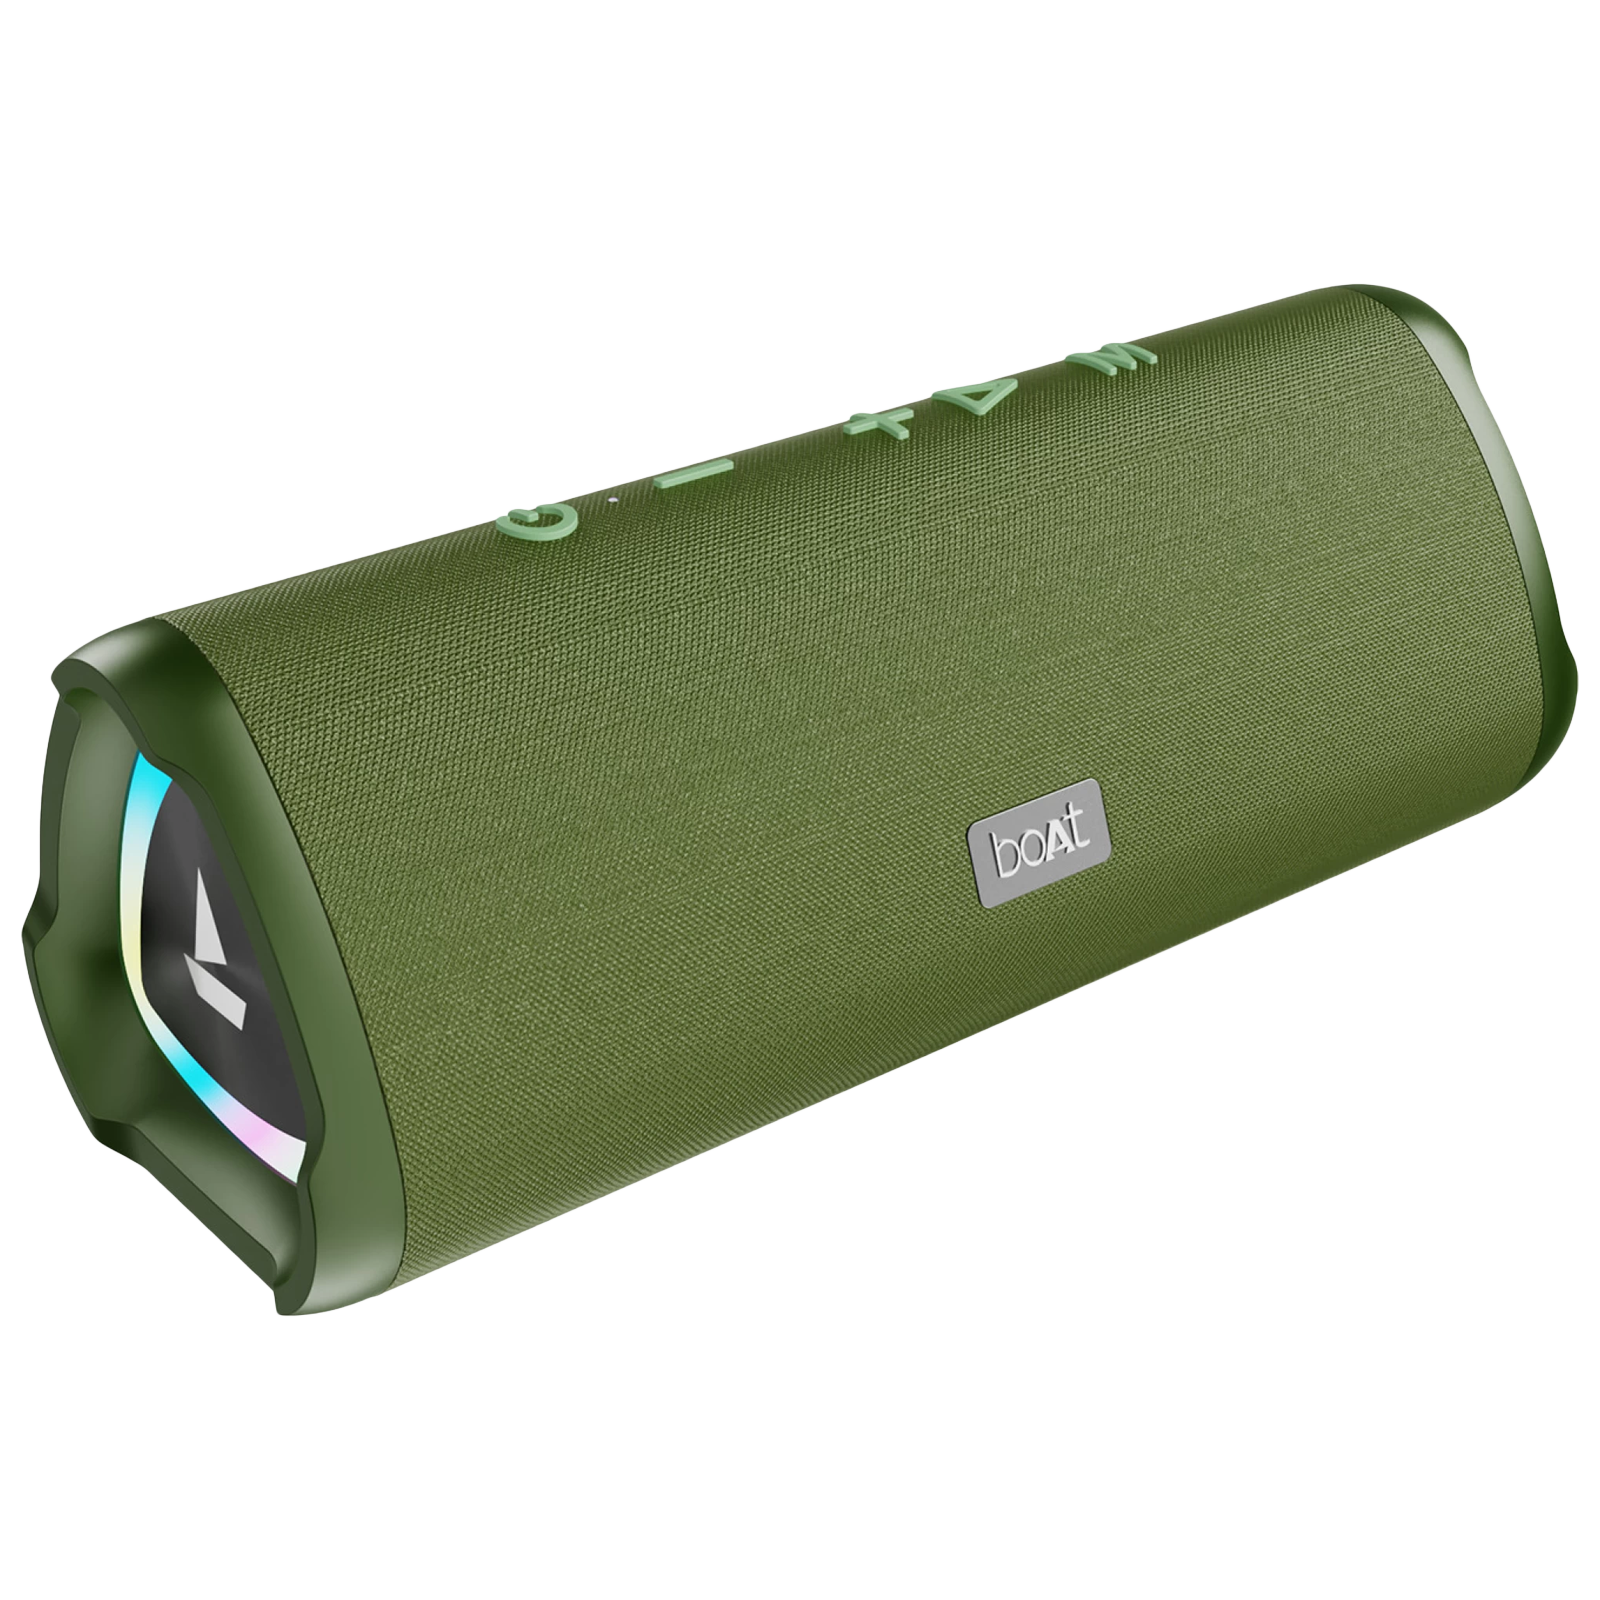 boAt Stone 750 12W Portable Bluetooth Speaker (IPX5 Water Resistant, Stereo Sound, 2.1 Channel, Moss Green)